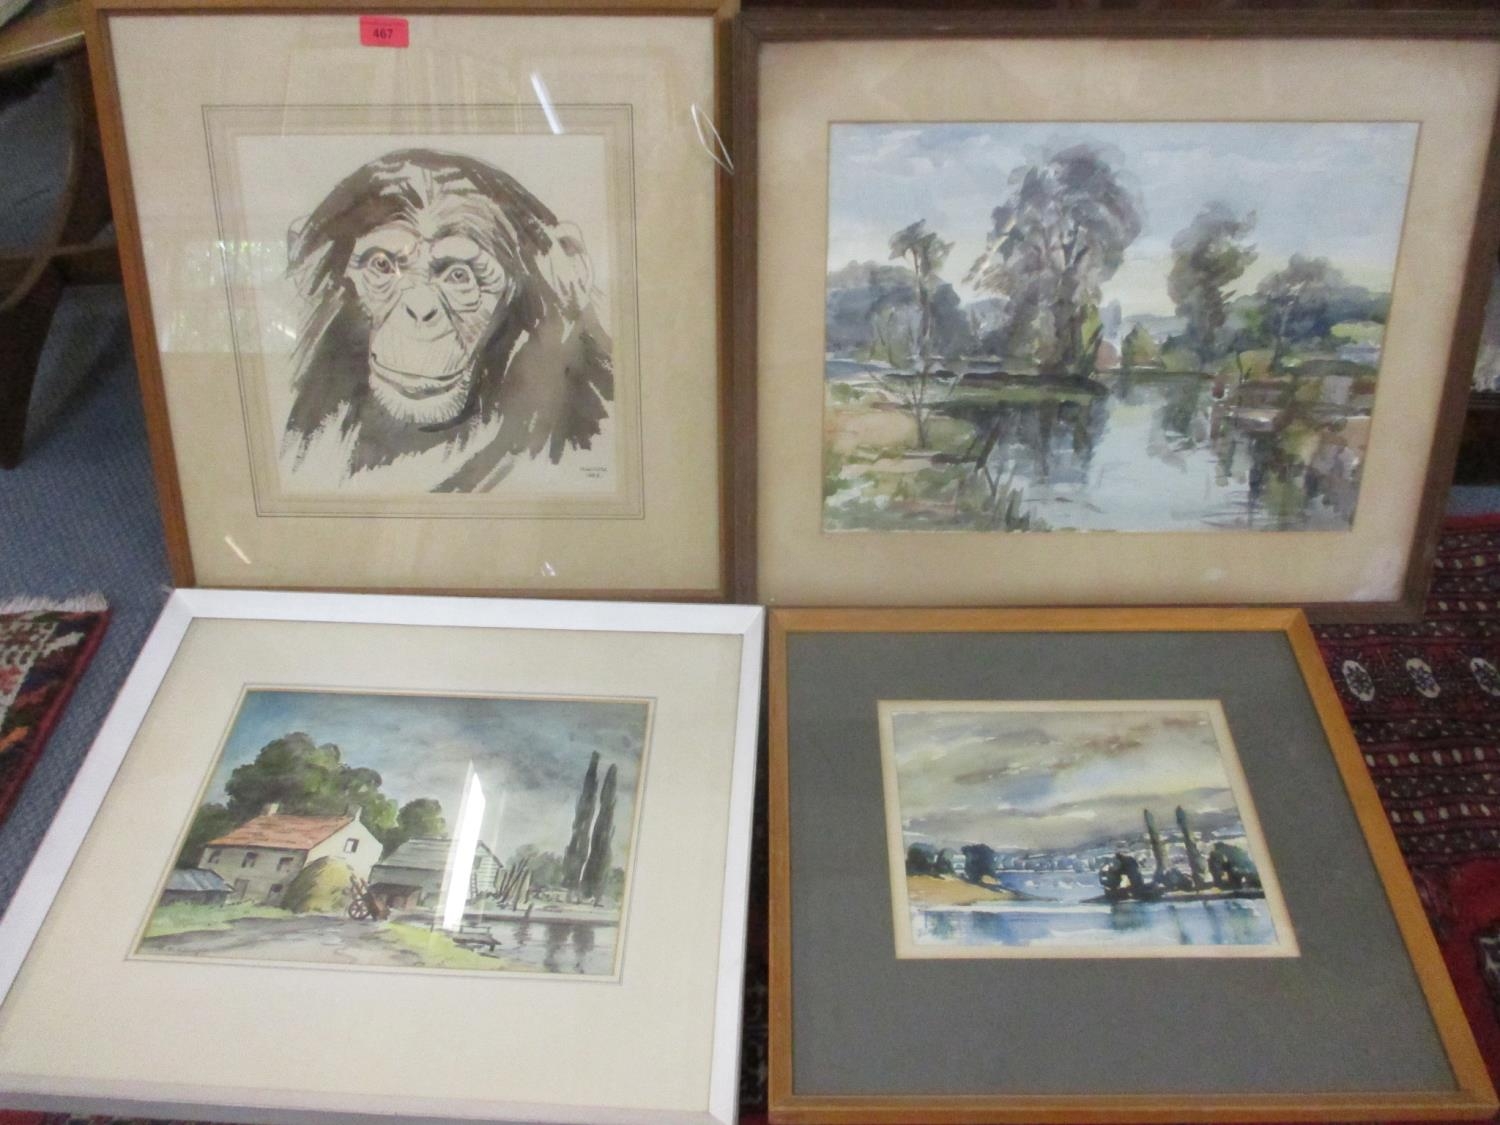 N U Cusa - a watercolour of a chimpanzee dated 1966 by the artist who was a member of the Society of